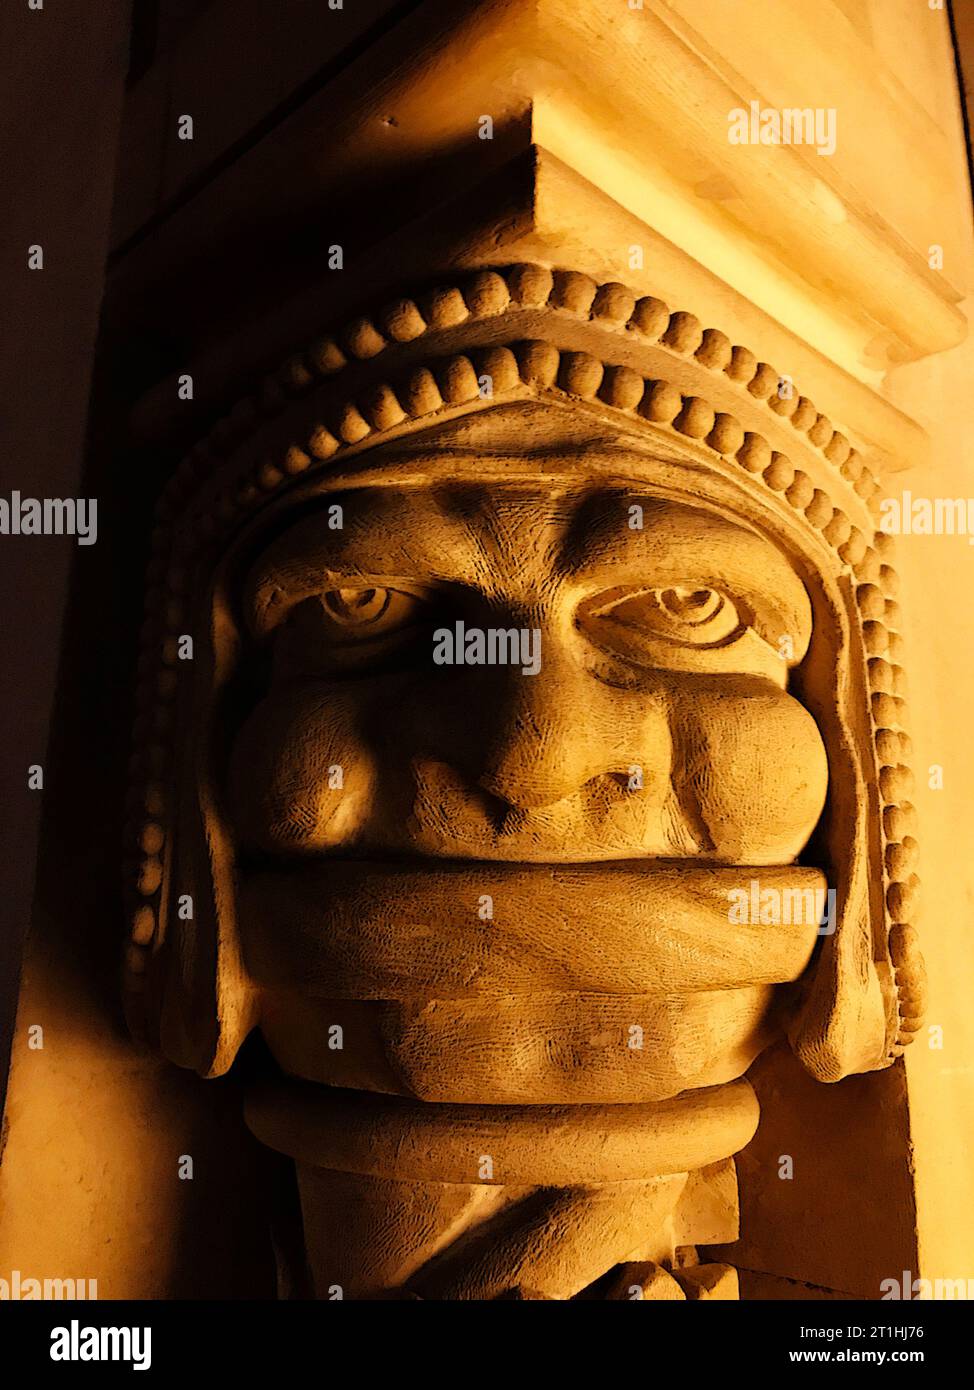 Artwork of mascaron ornament as a column capital, these frightening or chimeric faces were originally put on buildings to frighten away evil spirits. Stock Photo